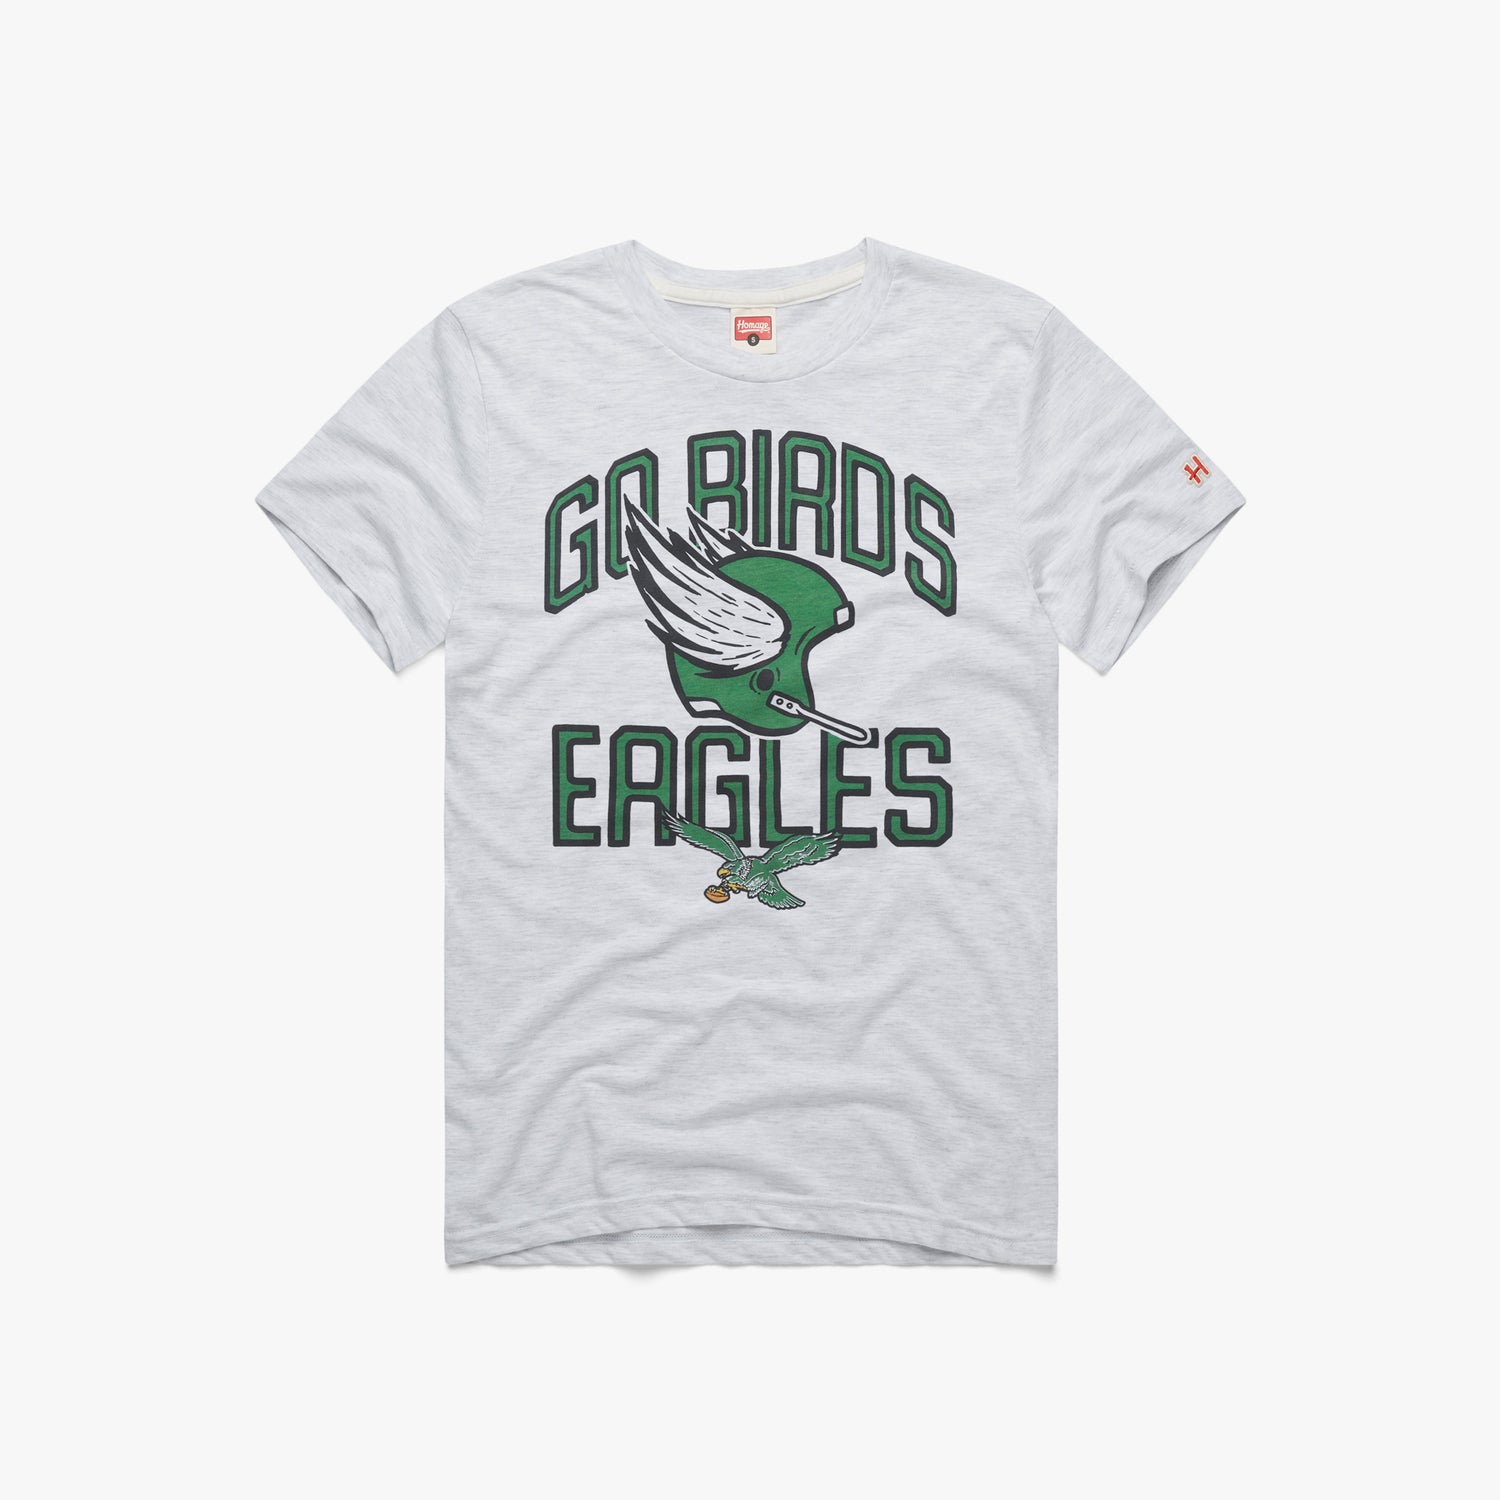 Philadelphia Eagles Go Birds T-Shirt | Kelly Green Eagles Apparel from Homage. | Officially Licensed NFL Apparel from Homage Pro Shop.